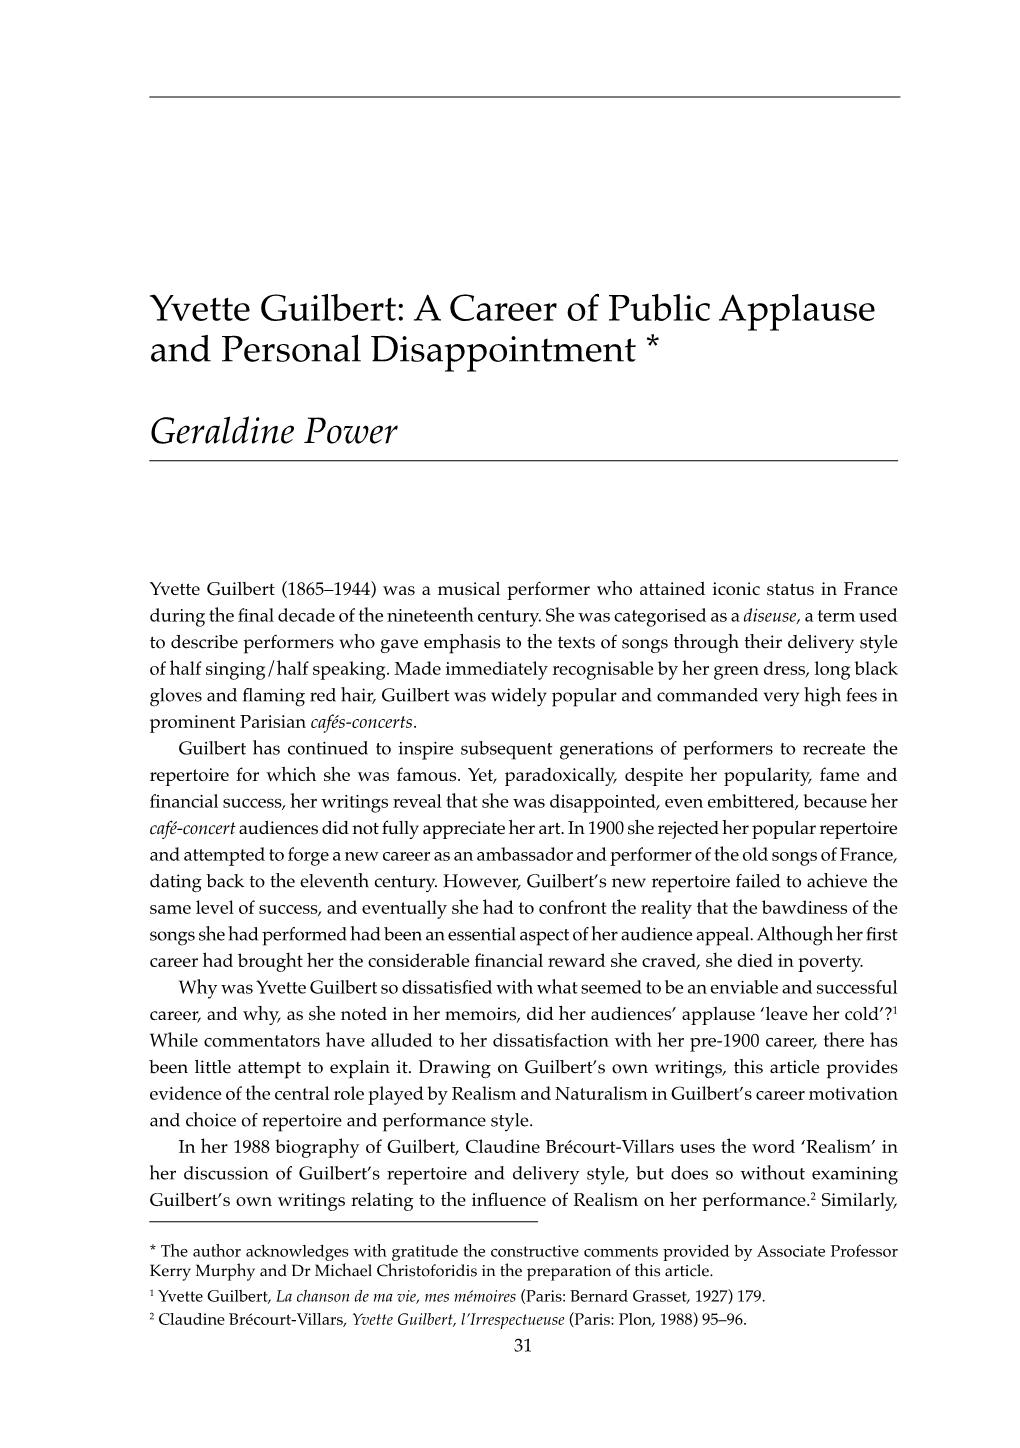 Yvette Guilbert: a Career of Public Applause and Personal Disappointment *